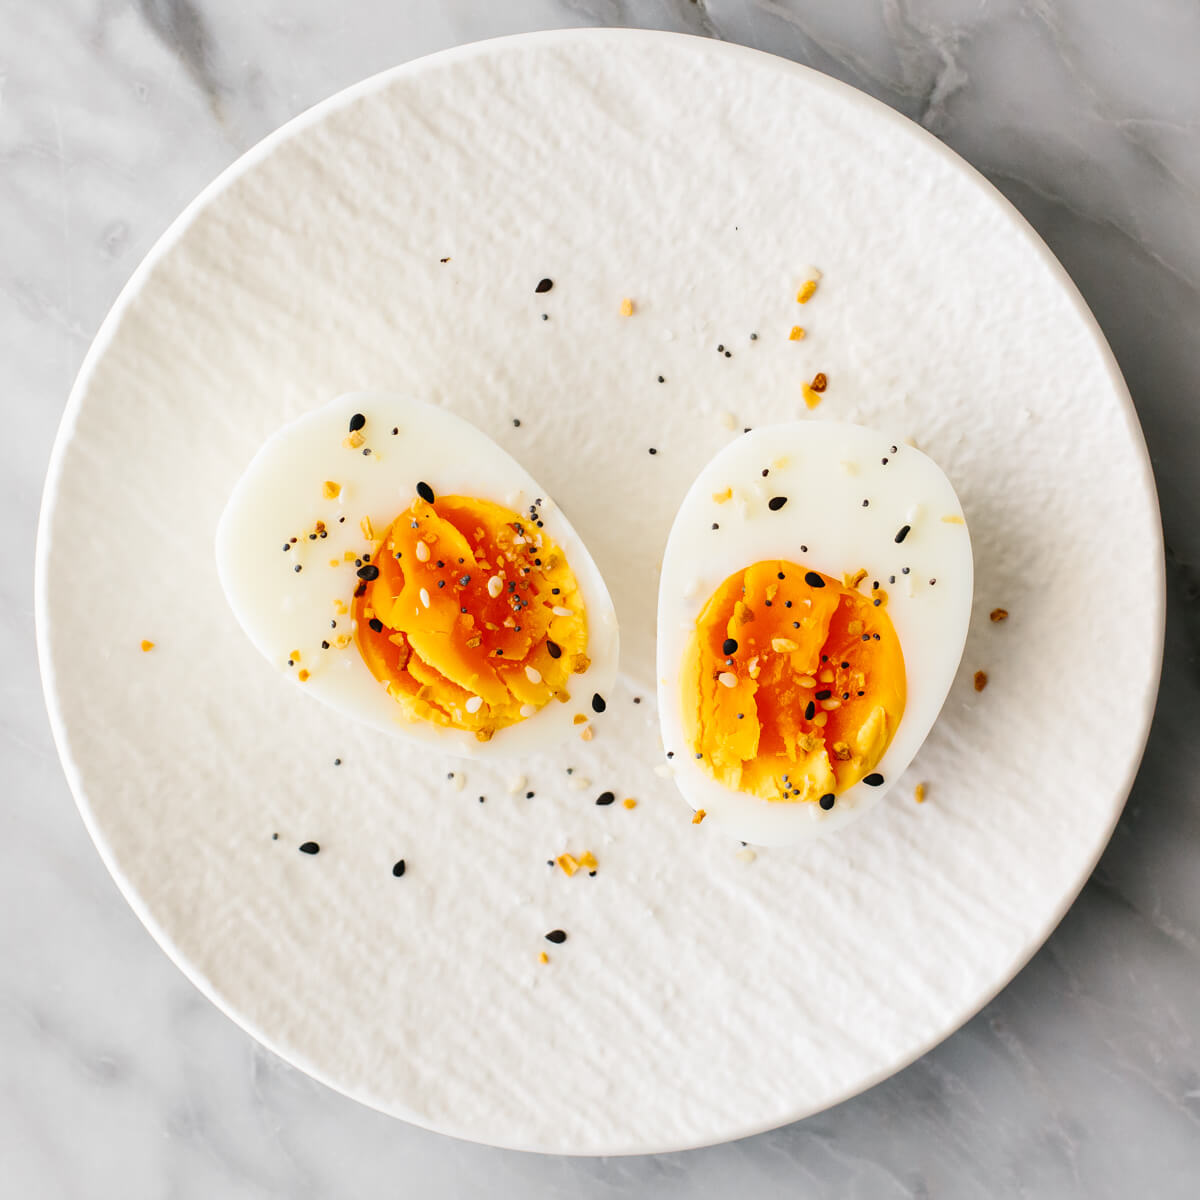 Boiled egg with seasoning on a plate